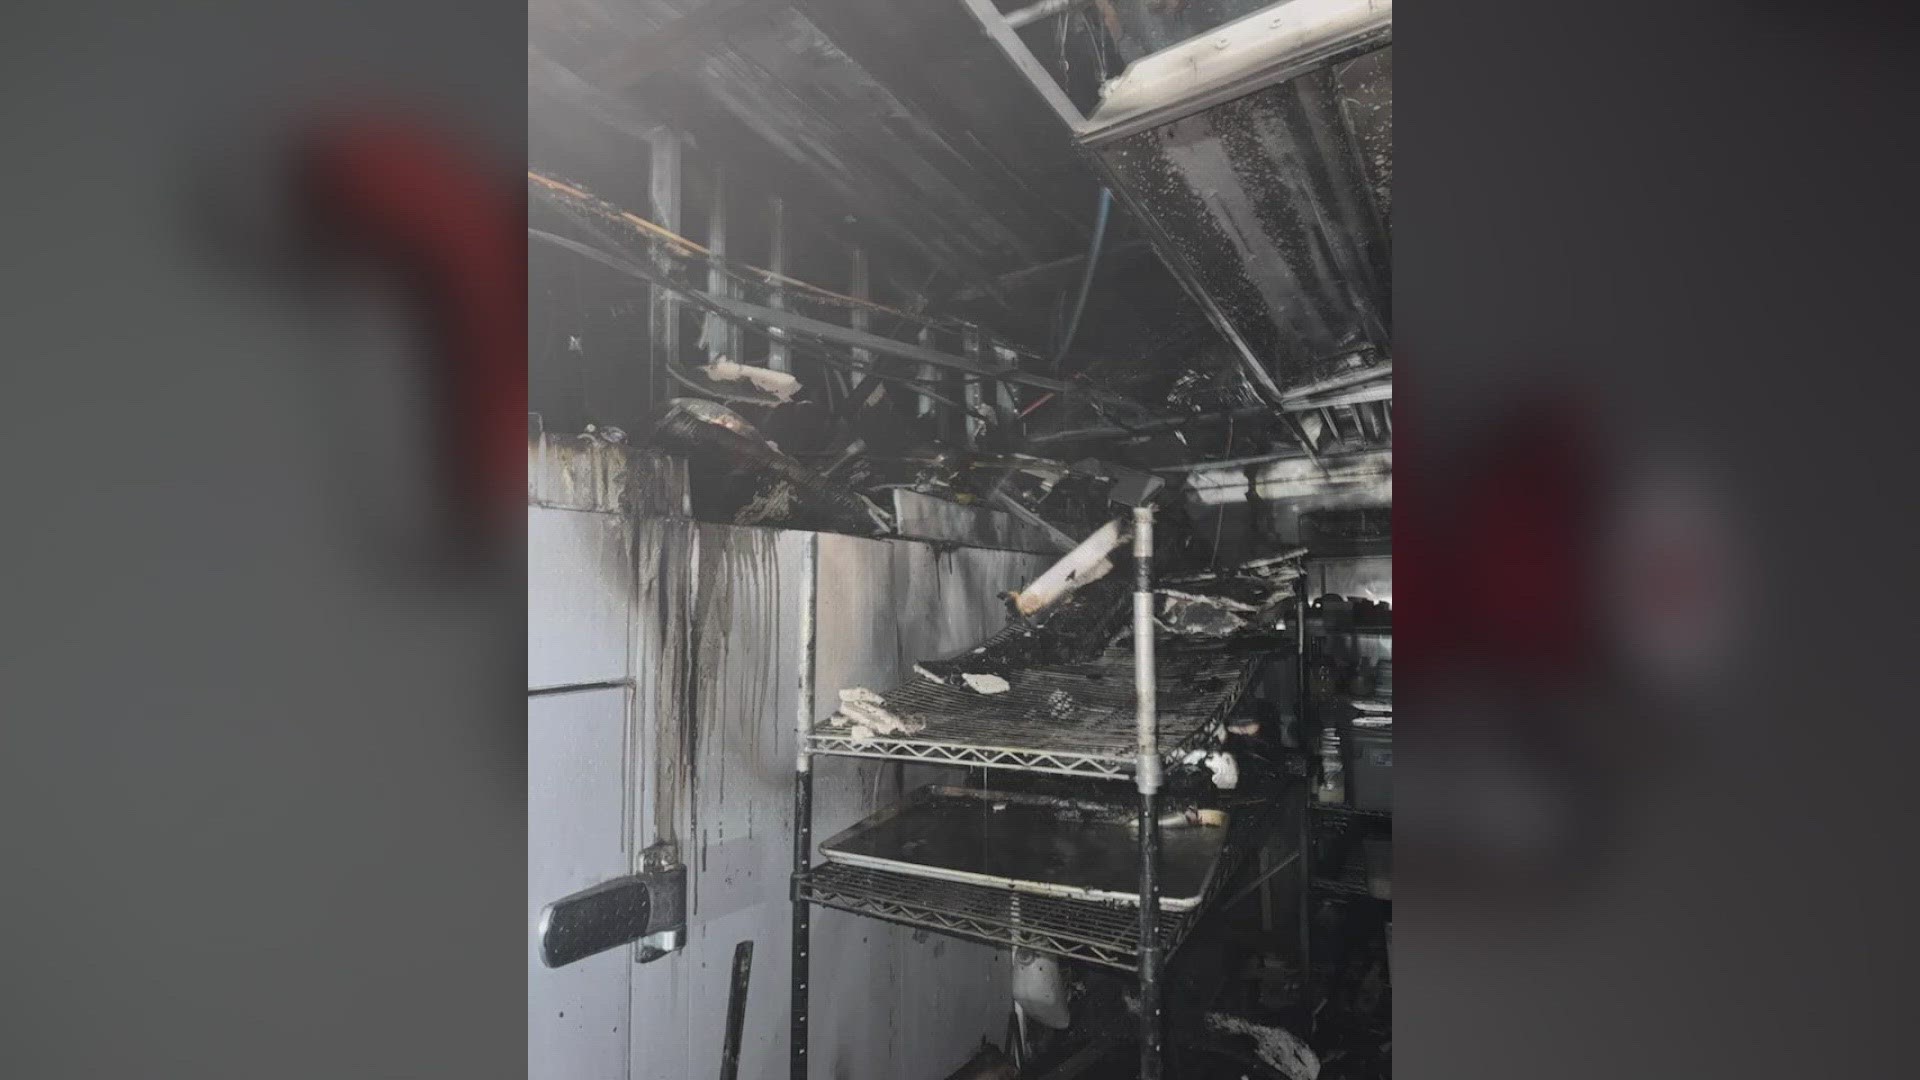 On Monday morning, a fire happened at the Volcano restaurant in the 3900 block of E. 42nd St. in Odessa. The fire was caused by an electrical issue.